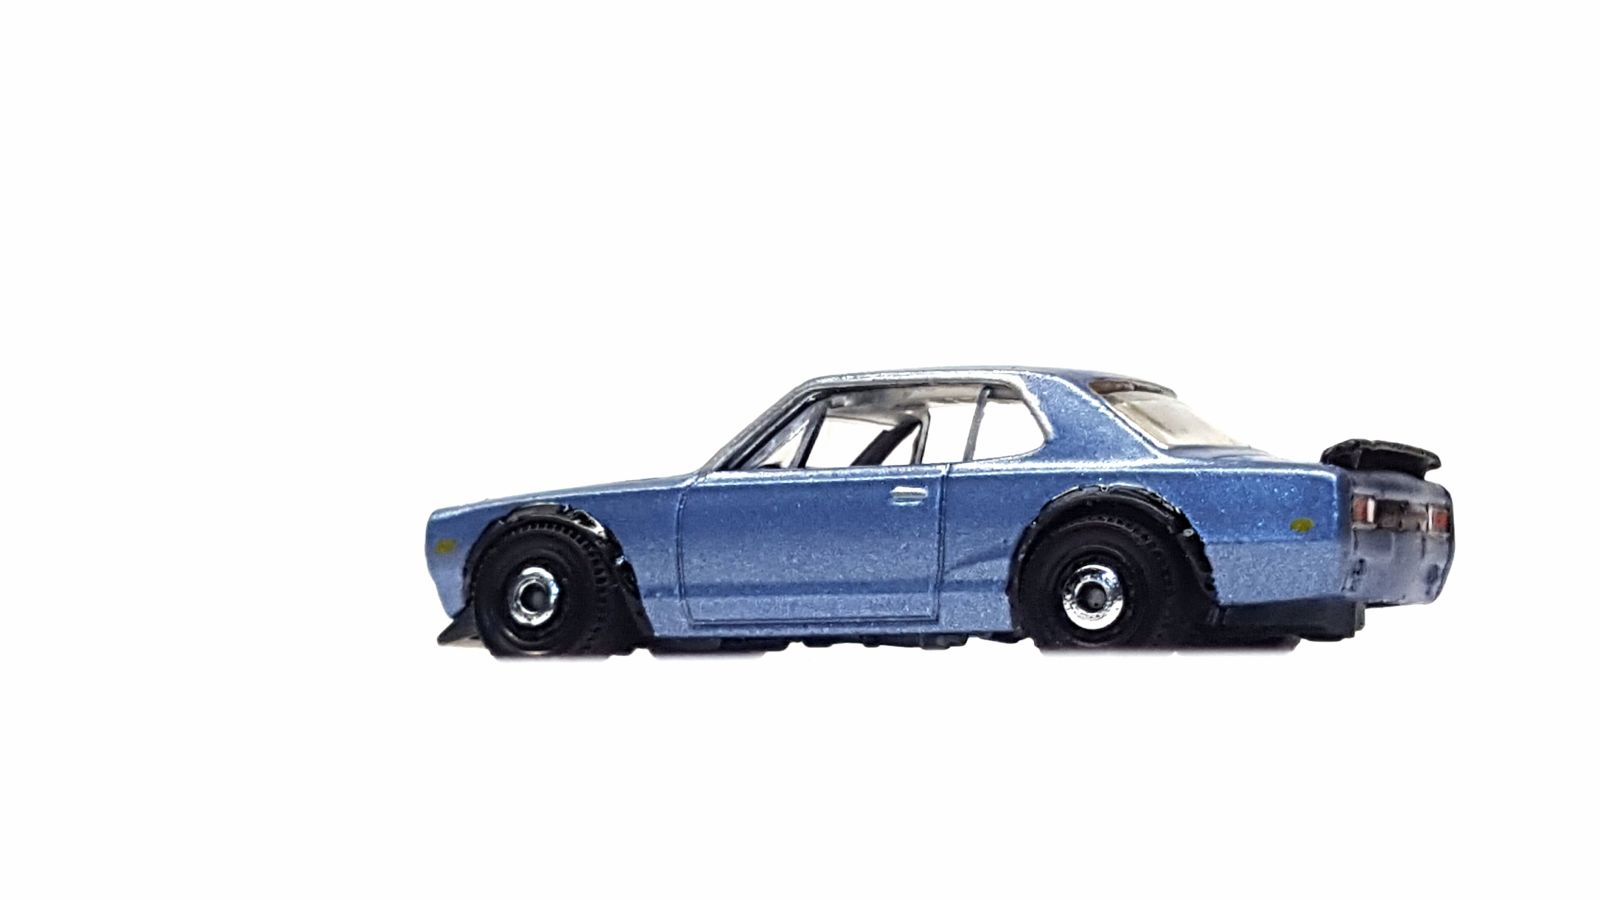 Illustration for article titled Long time, no post. A CUSTOM Skyline 2000 GT-R!!!